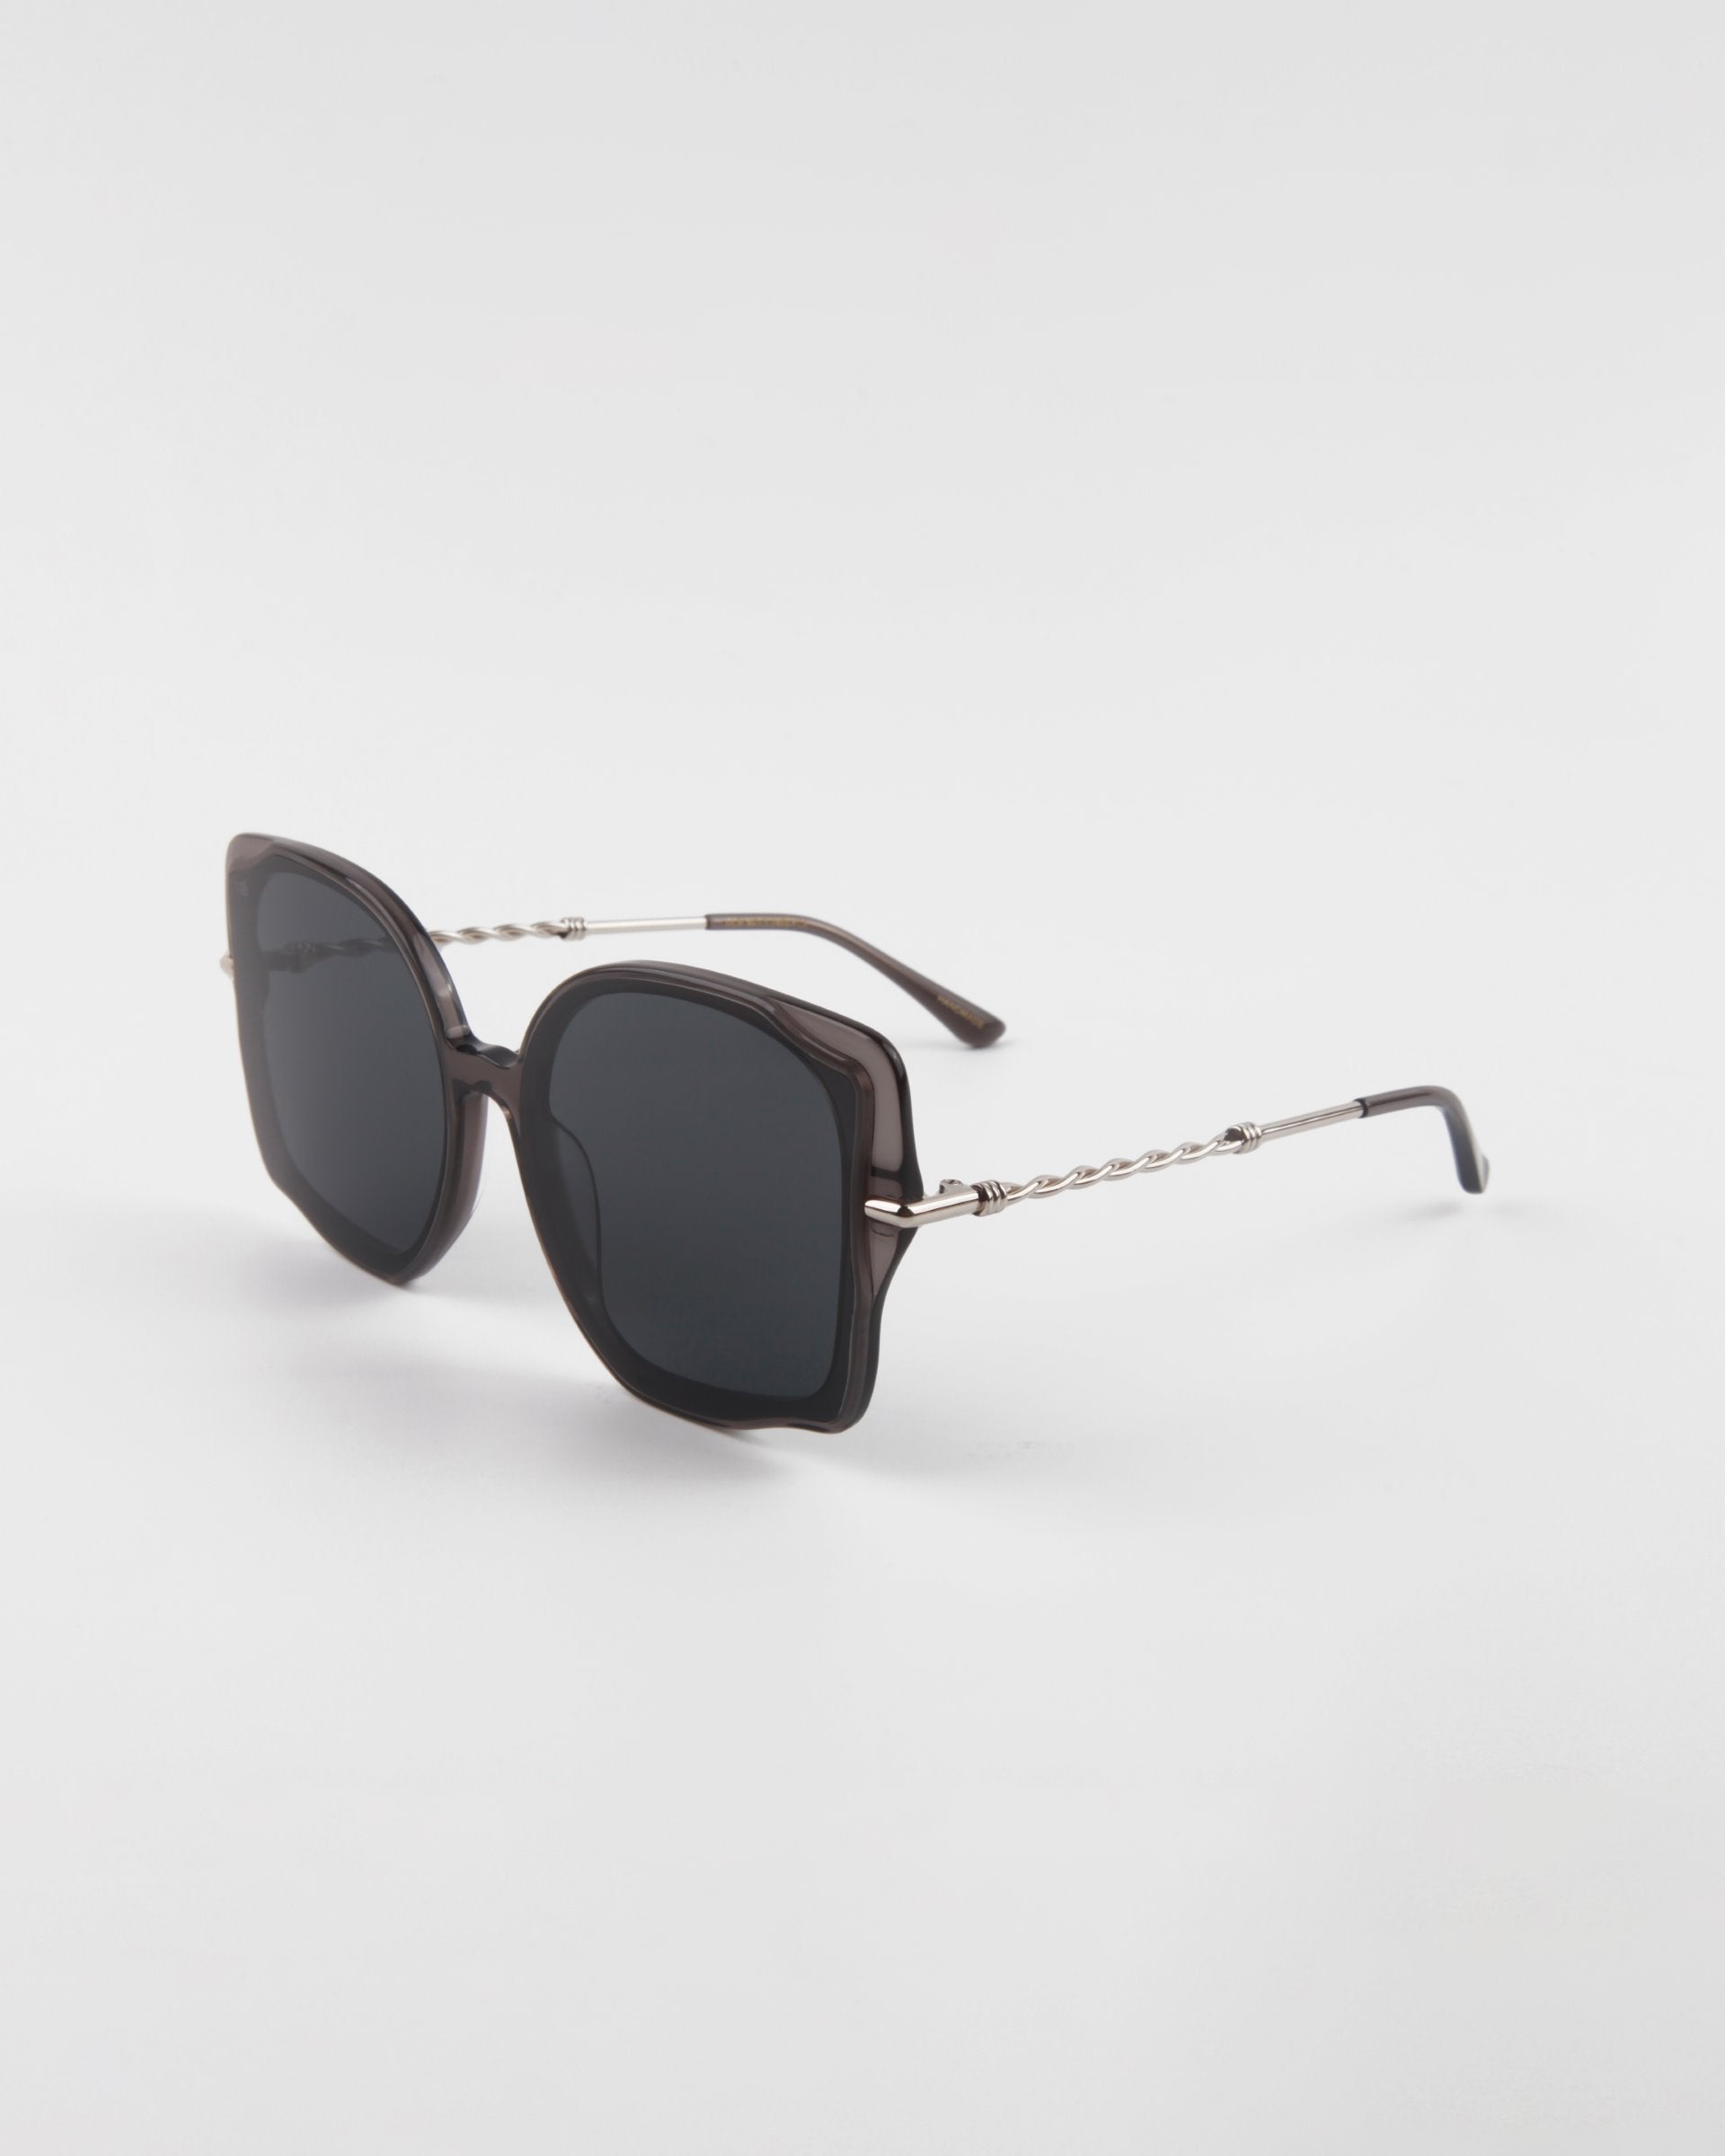 A pair of stylish, oversized square Fahrenheit sunglasses with dark lenses and thin, intricate 18-karat gold-plated arms by For Art's Sake®, isolated on a white background.